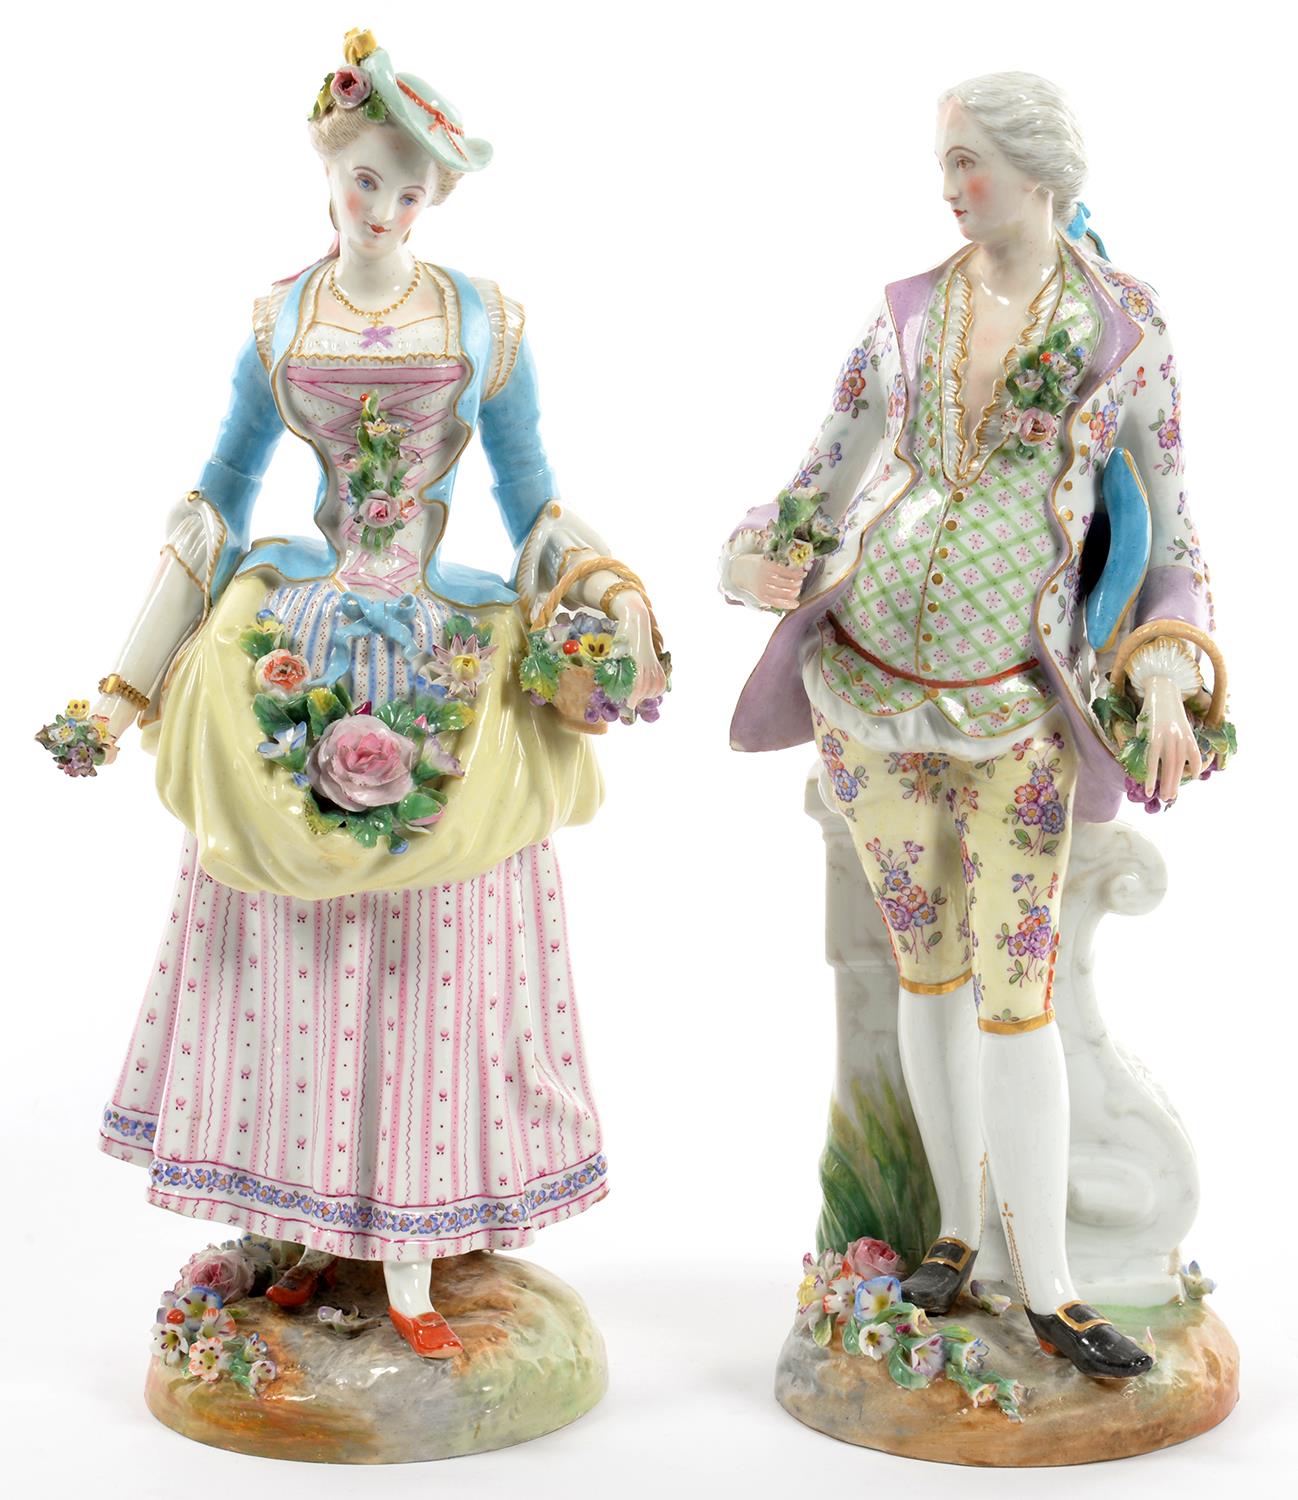 A PAIR OF FRENCH PORCELAIN FIGURES OF A LADY AND GALLANT AS FLOWER GATHERERS, ON FLORAL ENCRUSTED